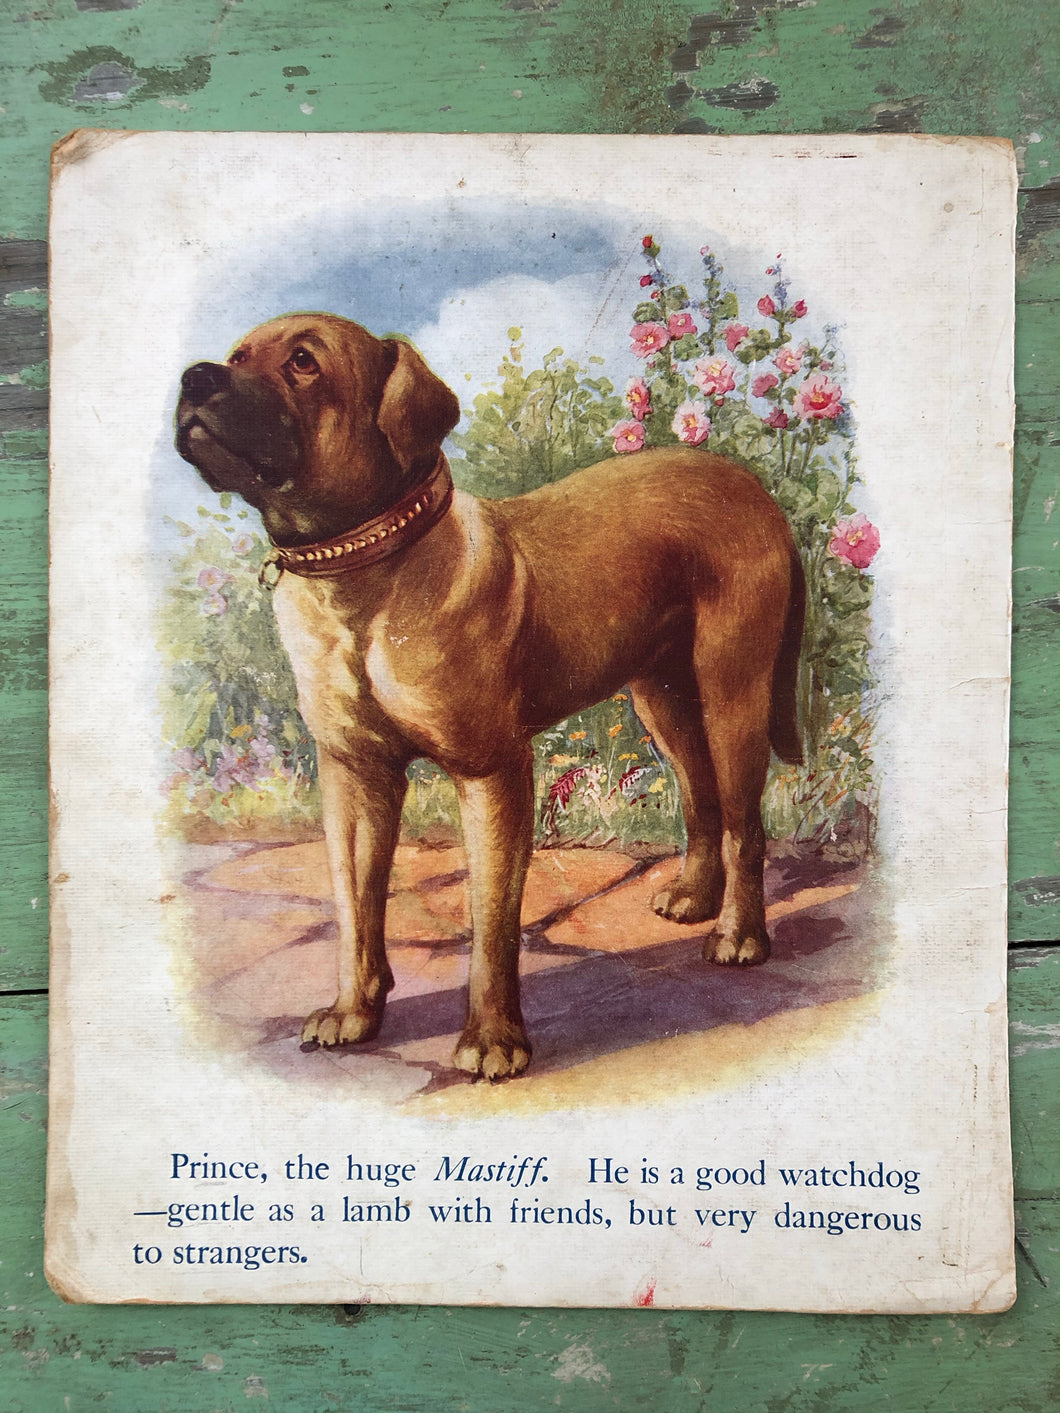 Mastiff print from “My Book of Cats and Dogs”